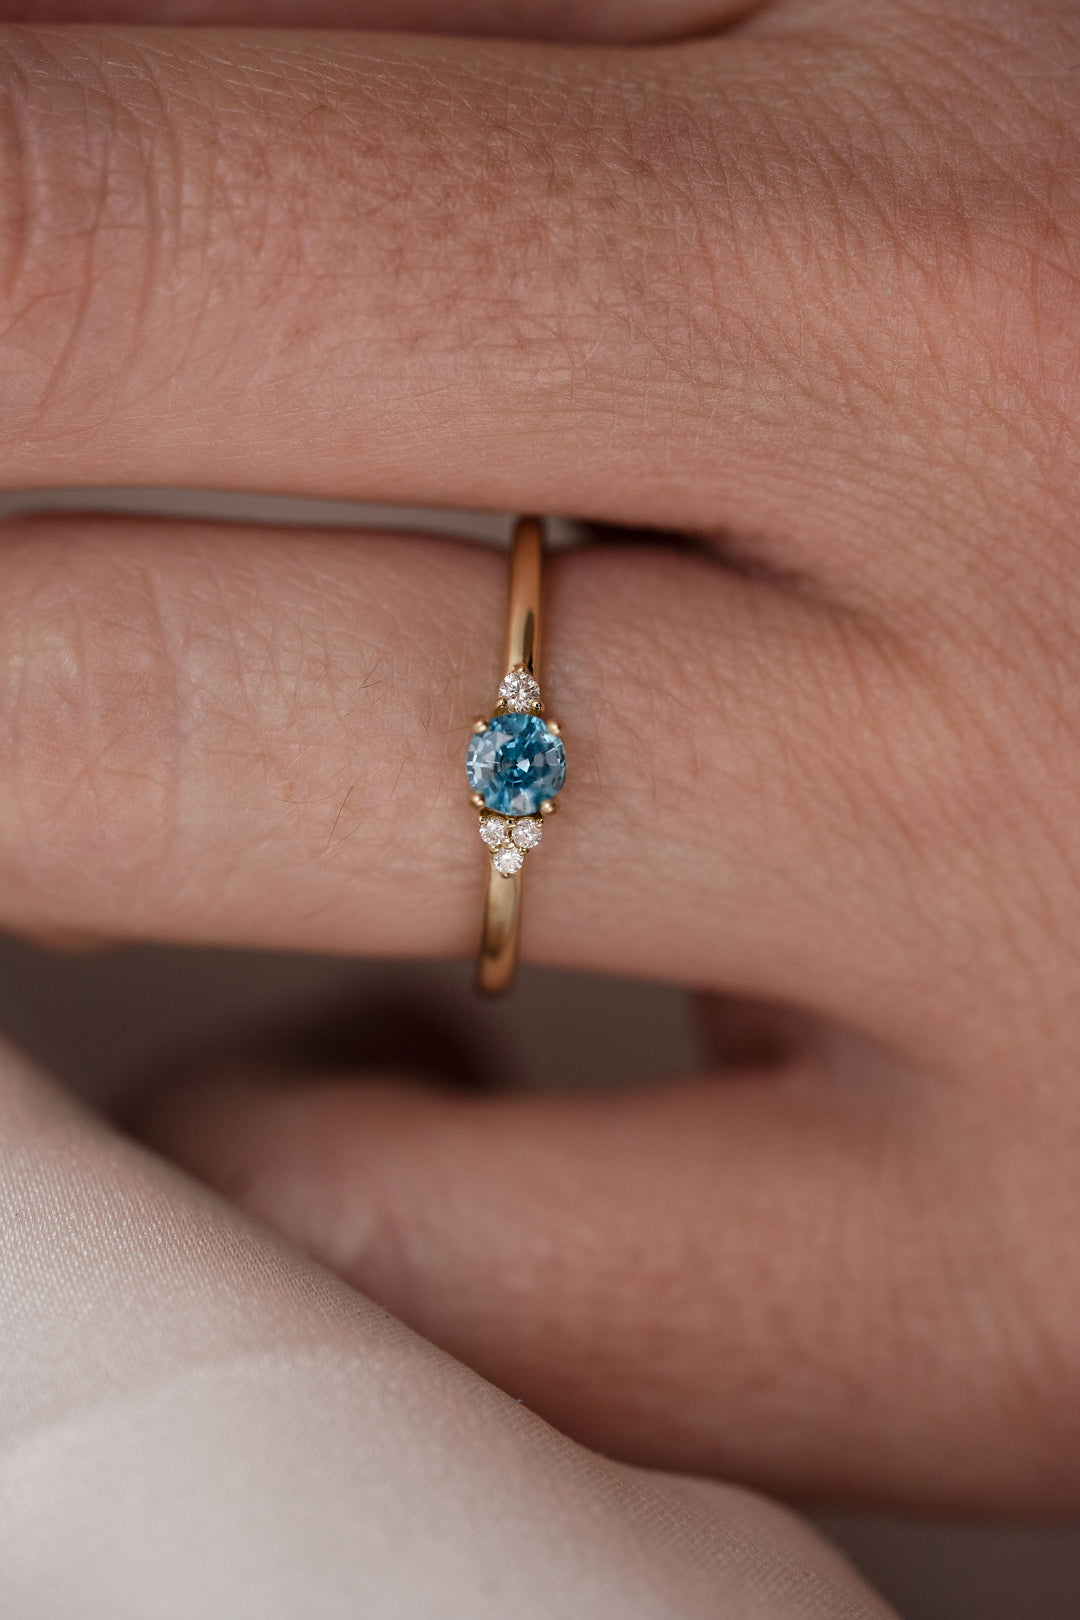 The Astra 0.38 CT Blue Zircon Ring